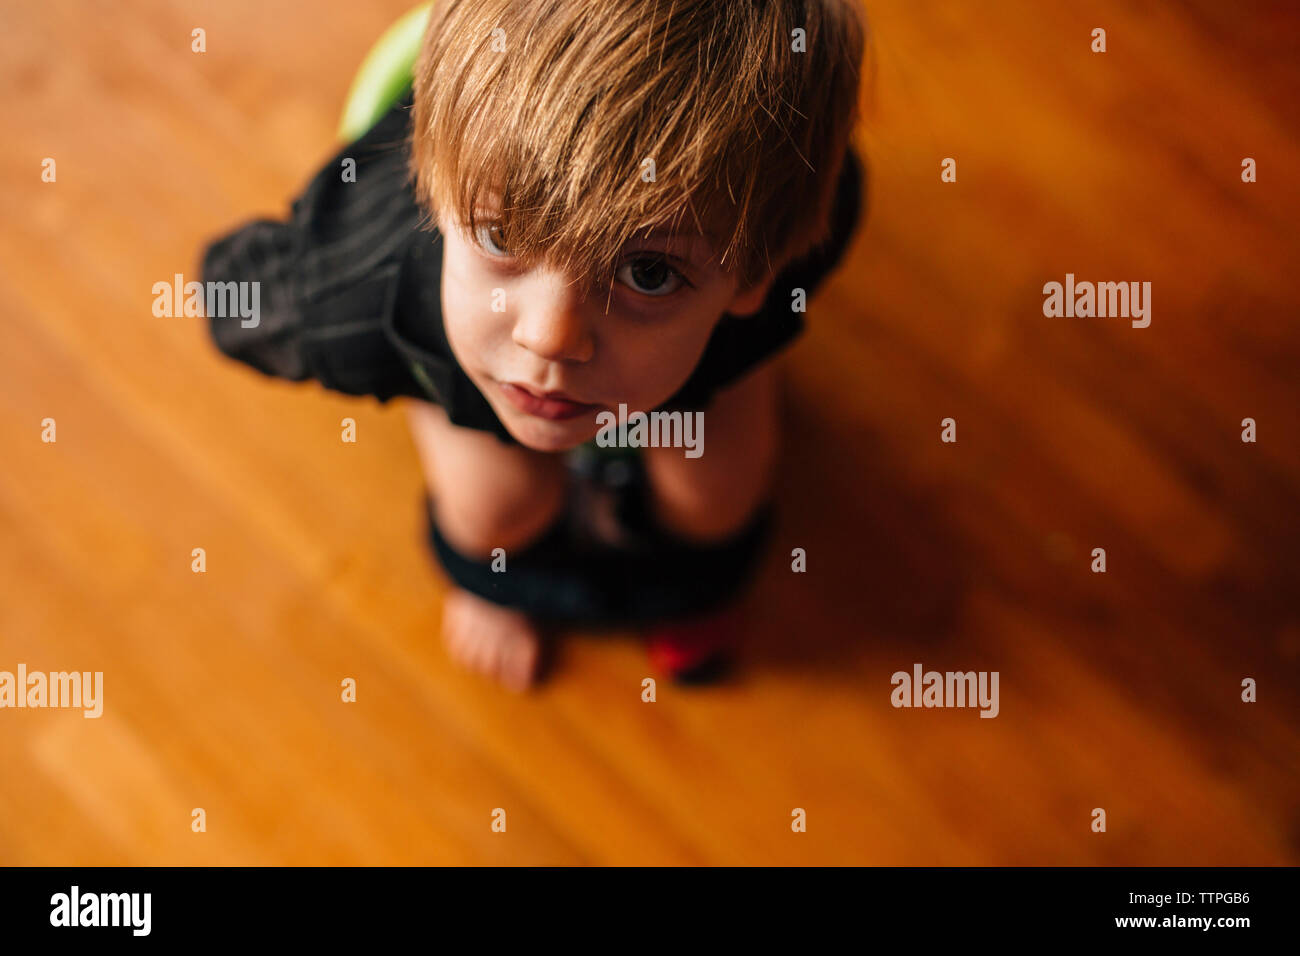 High angle view of boy sitting on baby toilet seat Stock Photo